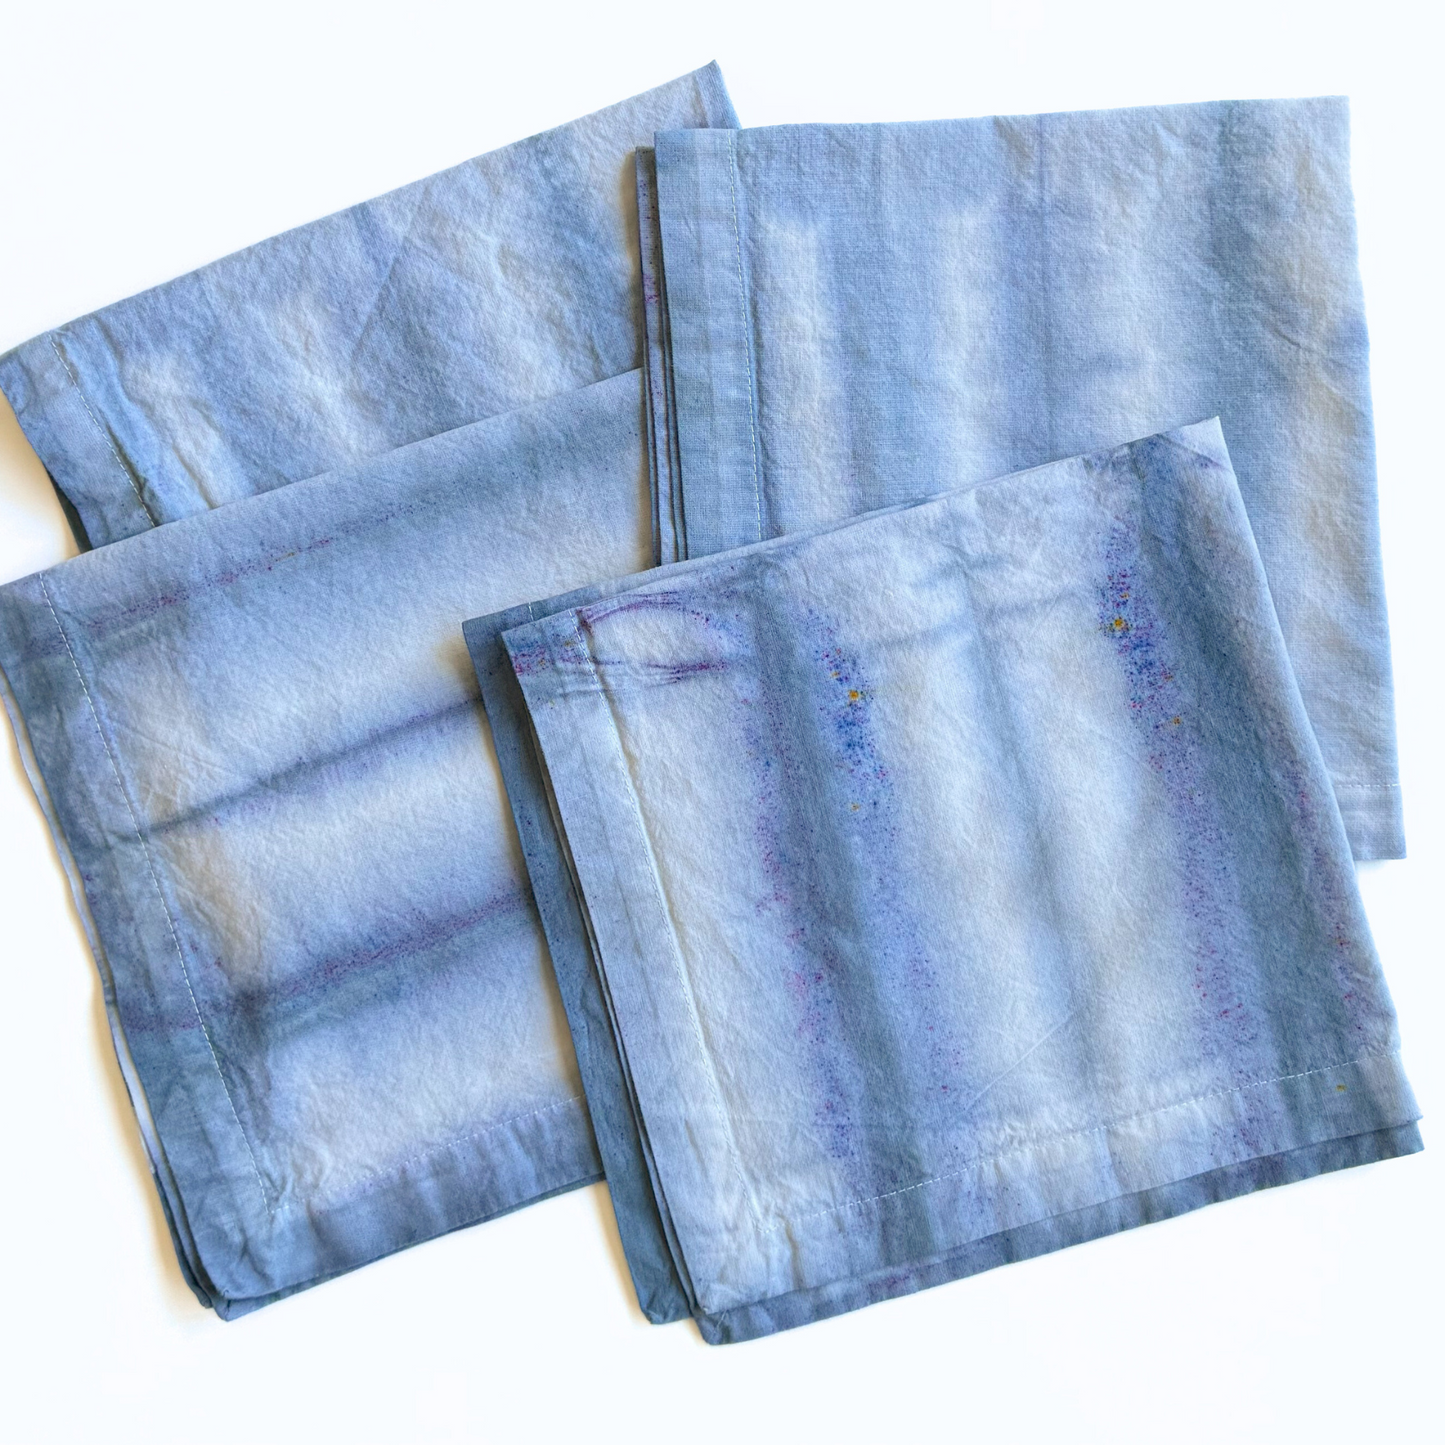 SET OF 4 - Hand-dyed Cotton Napkins - In a Straight Line